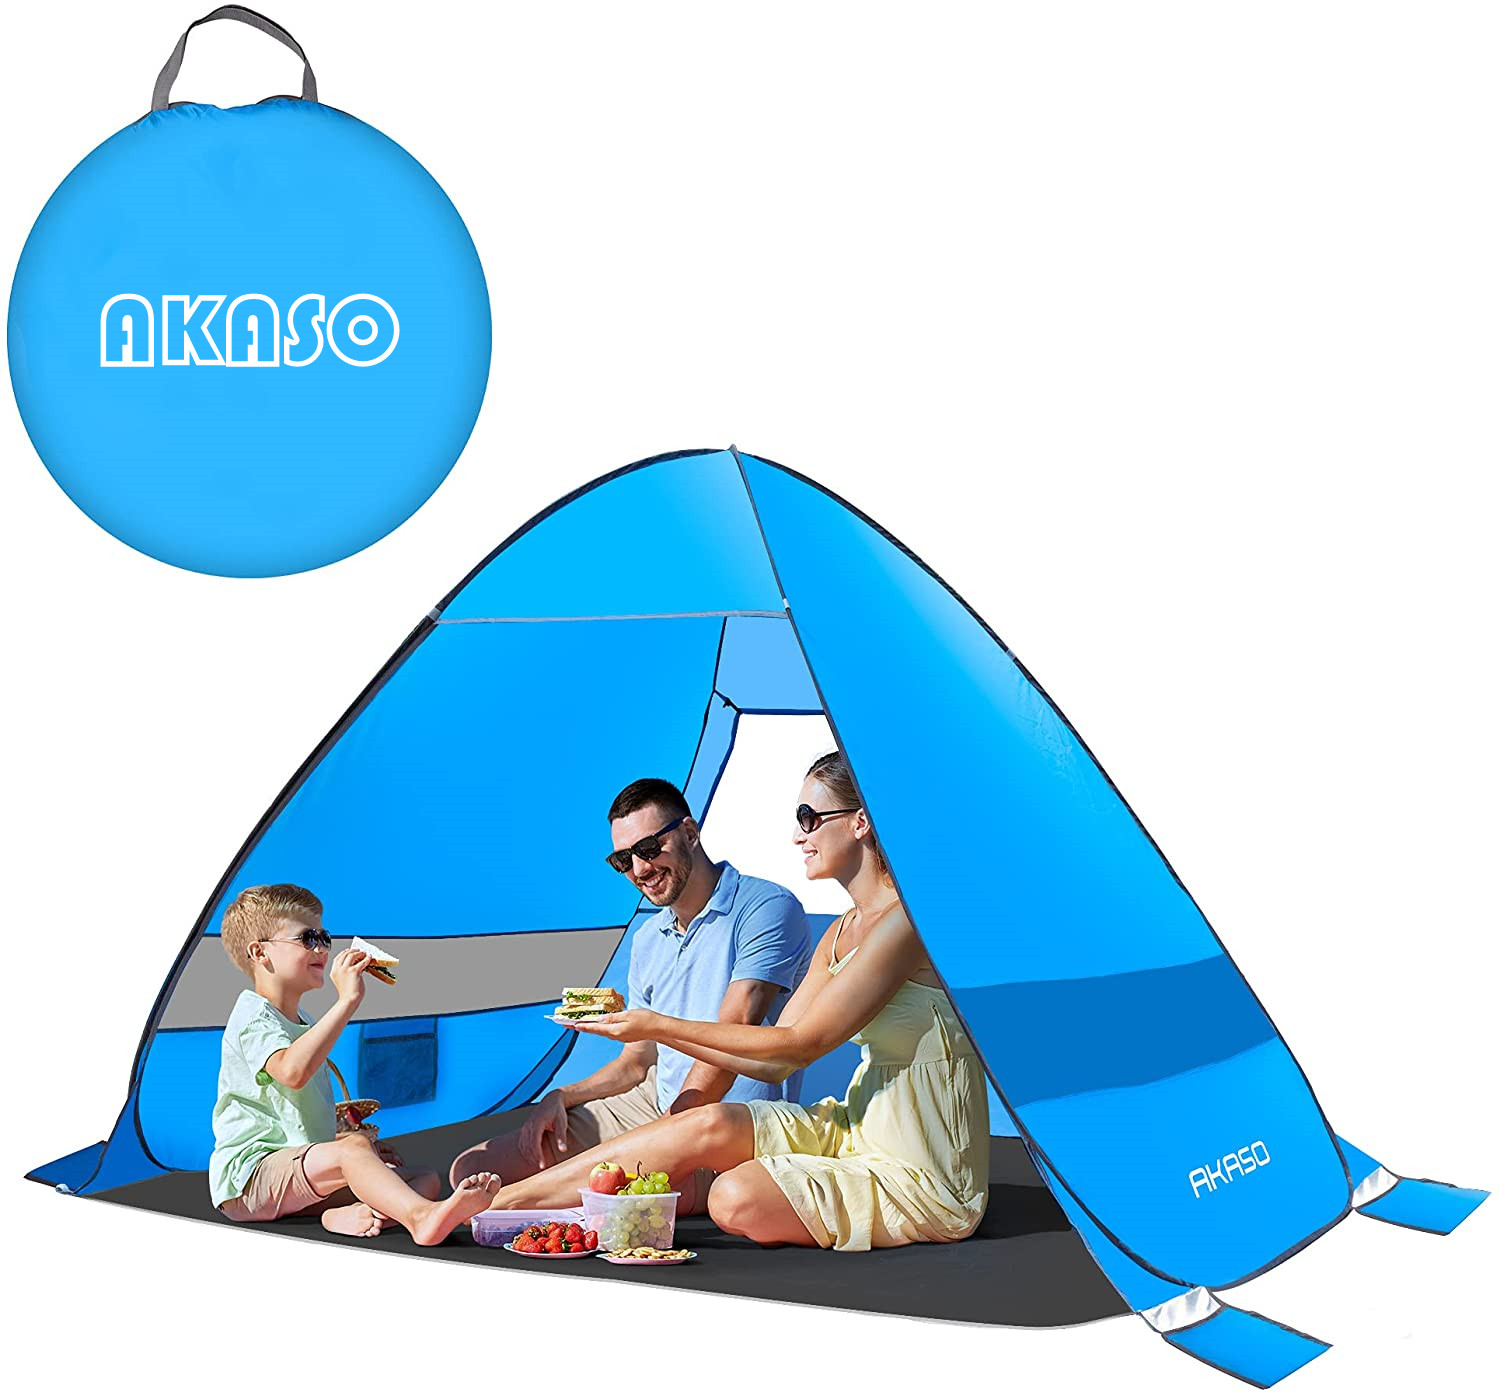 AKASO Pop-Up Beach Tent for 3-4 Person, 7.4' x 4.7' Shade Sun Shelter with UV Protectant Coating - image 1 of 9